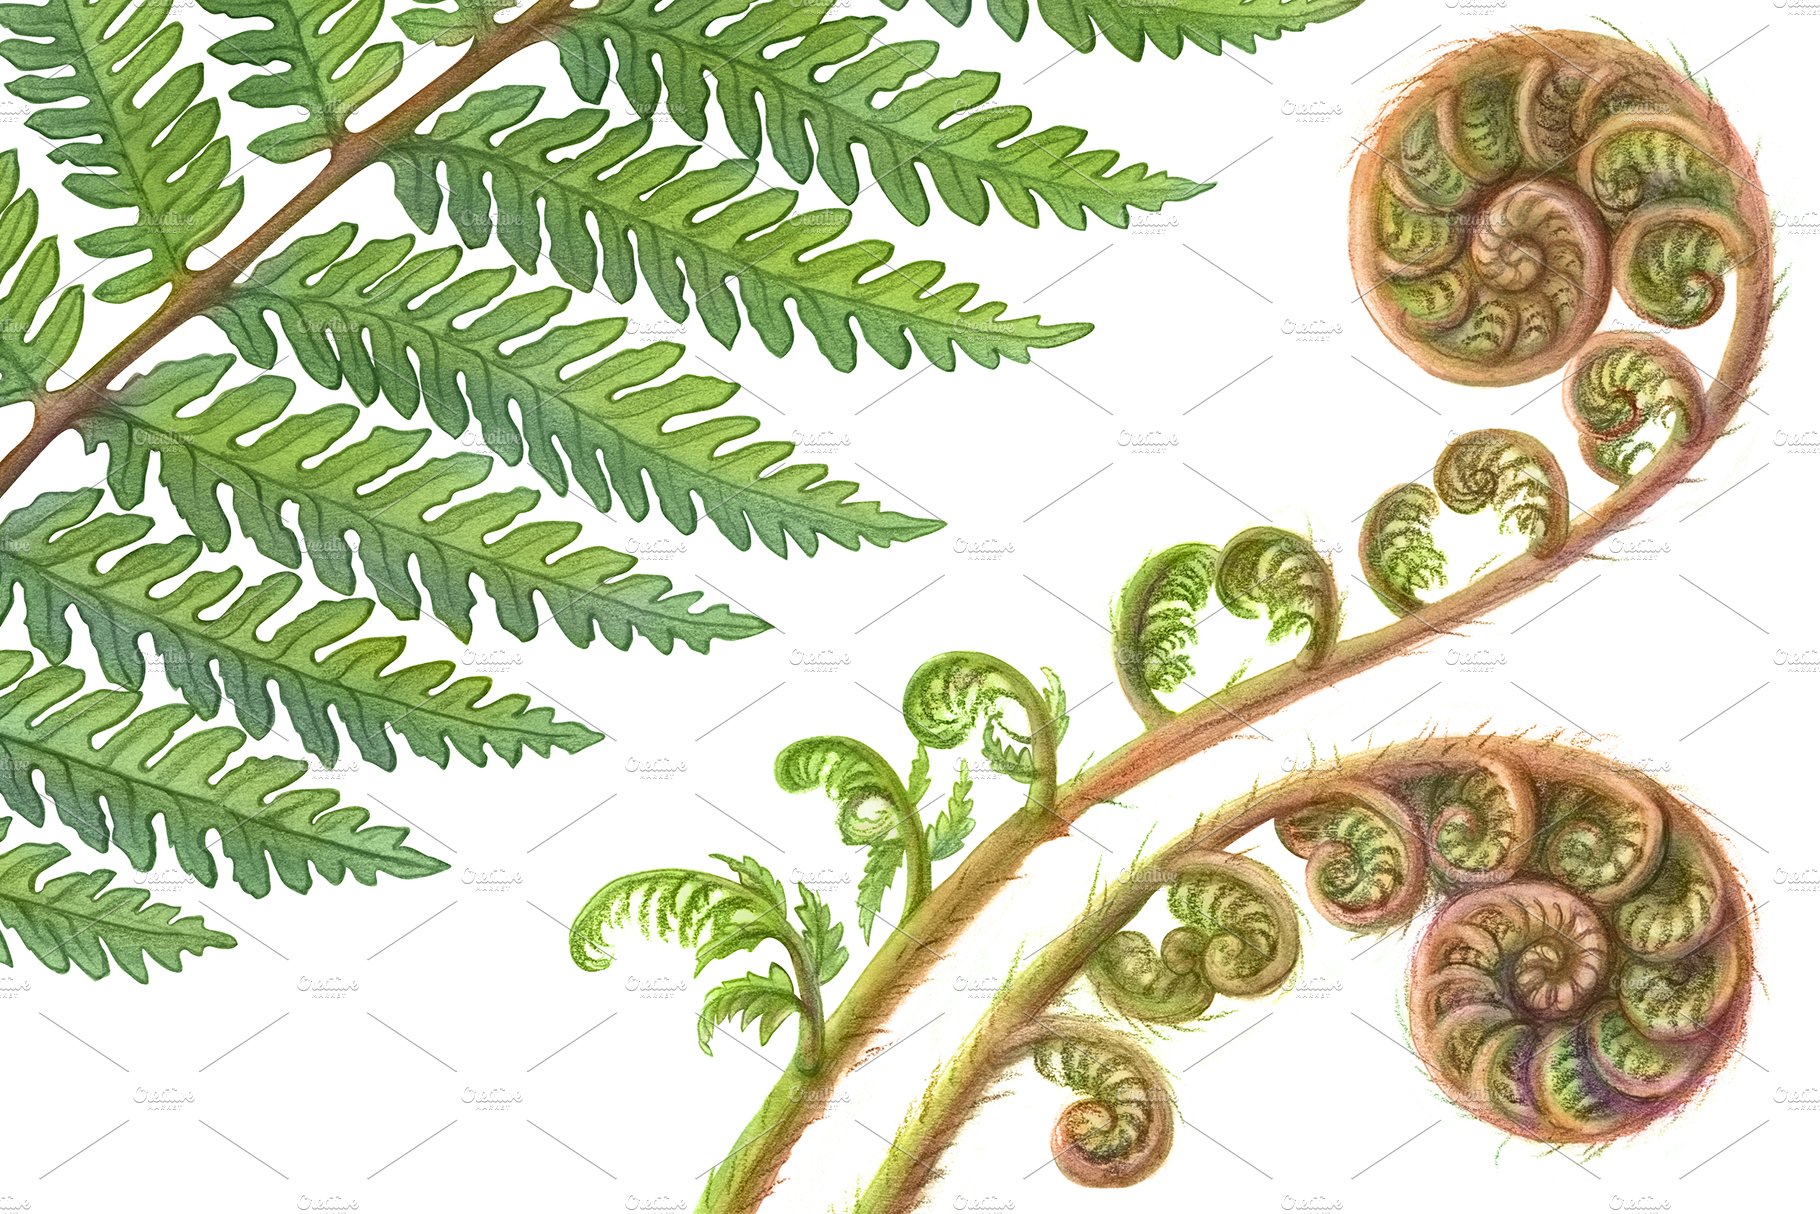 Drawing of a fern plant with green leaves.